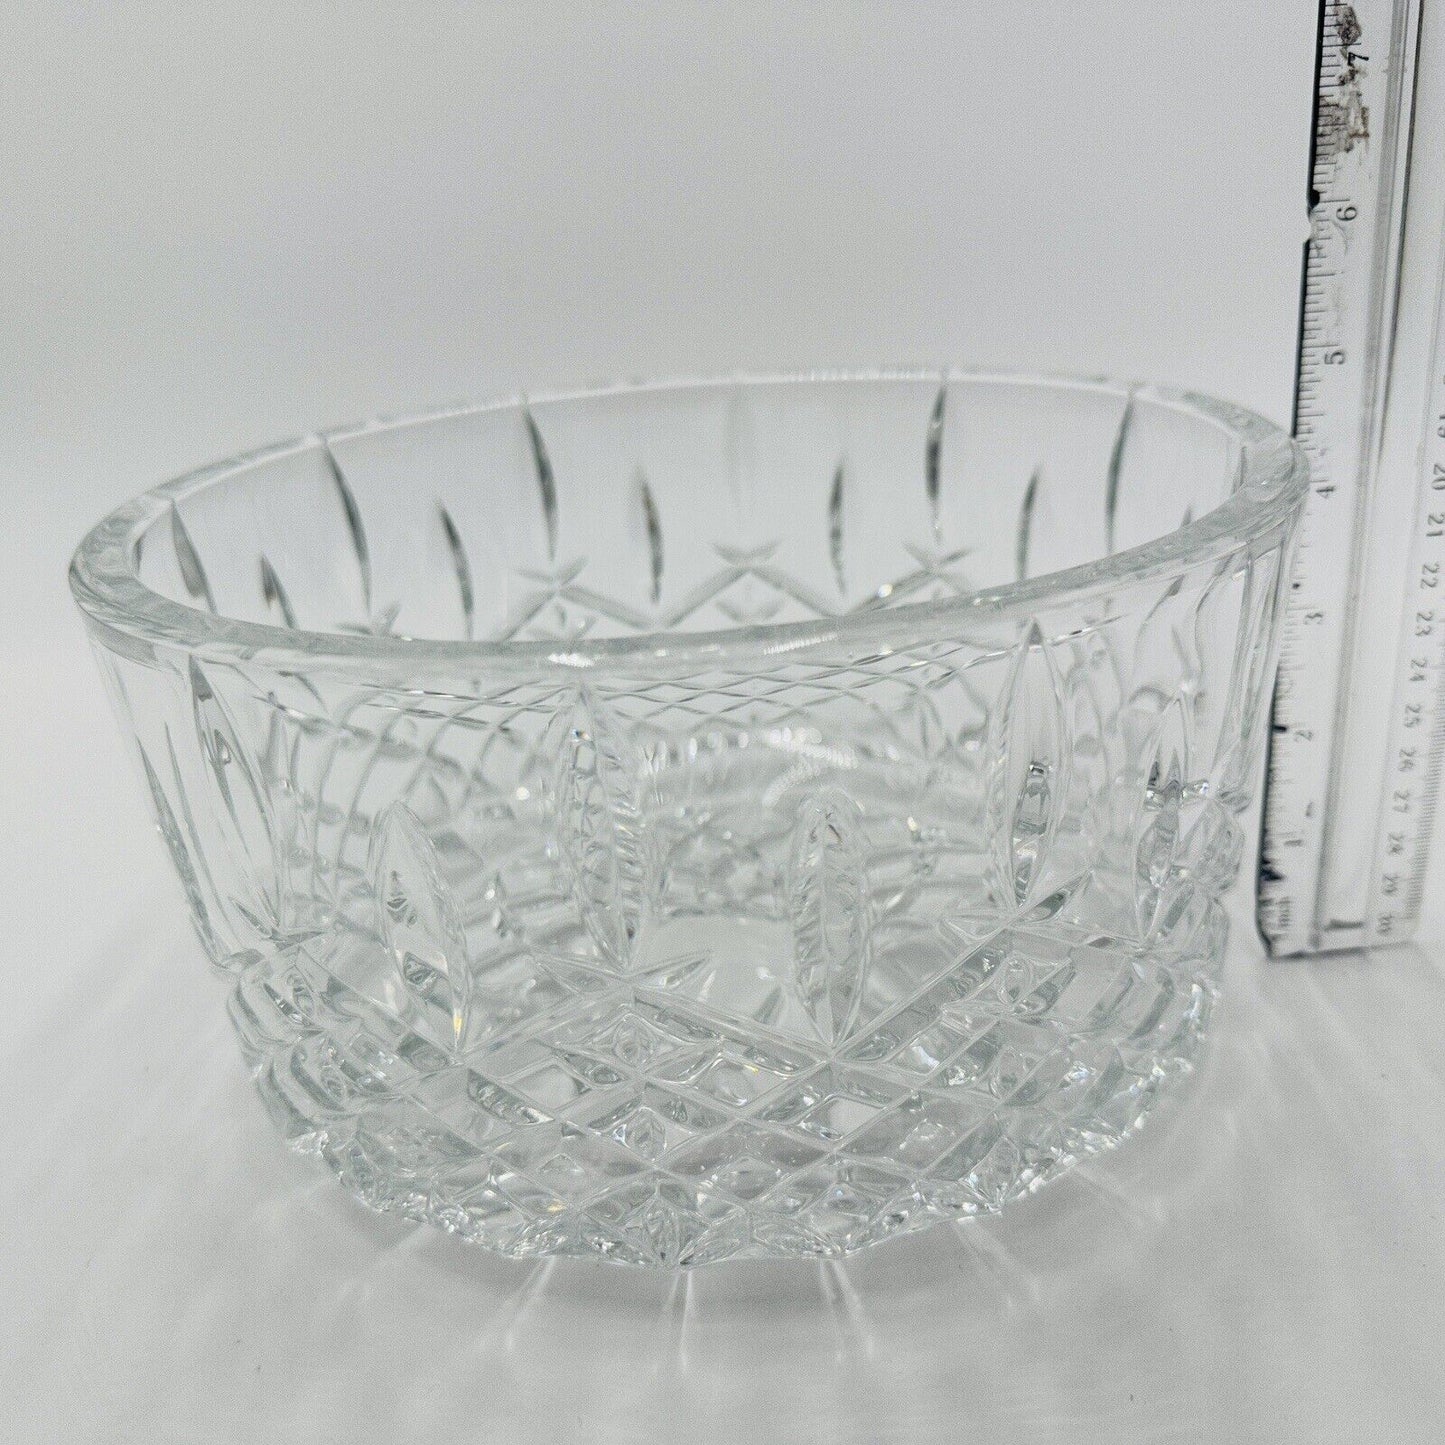 Marquis by Waterford Lead Crystal Markham 9"  Centerpiece Fruit Bowl Large Decor